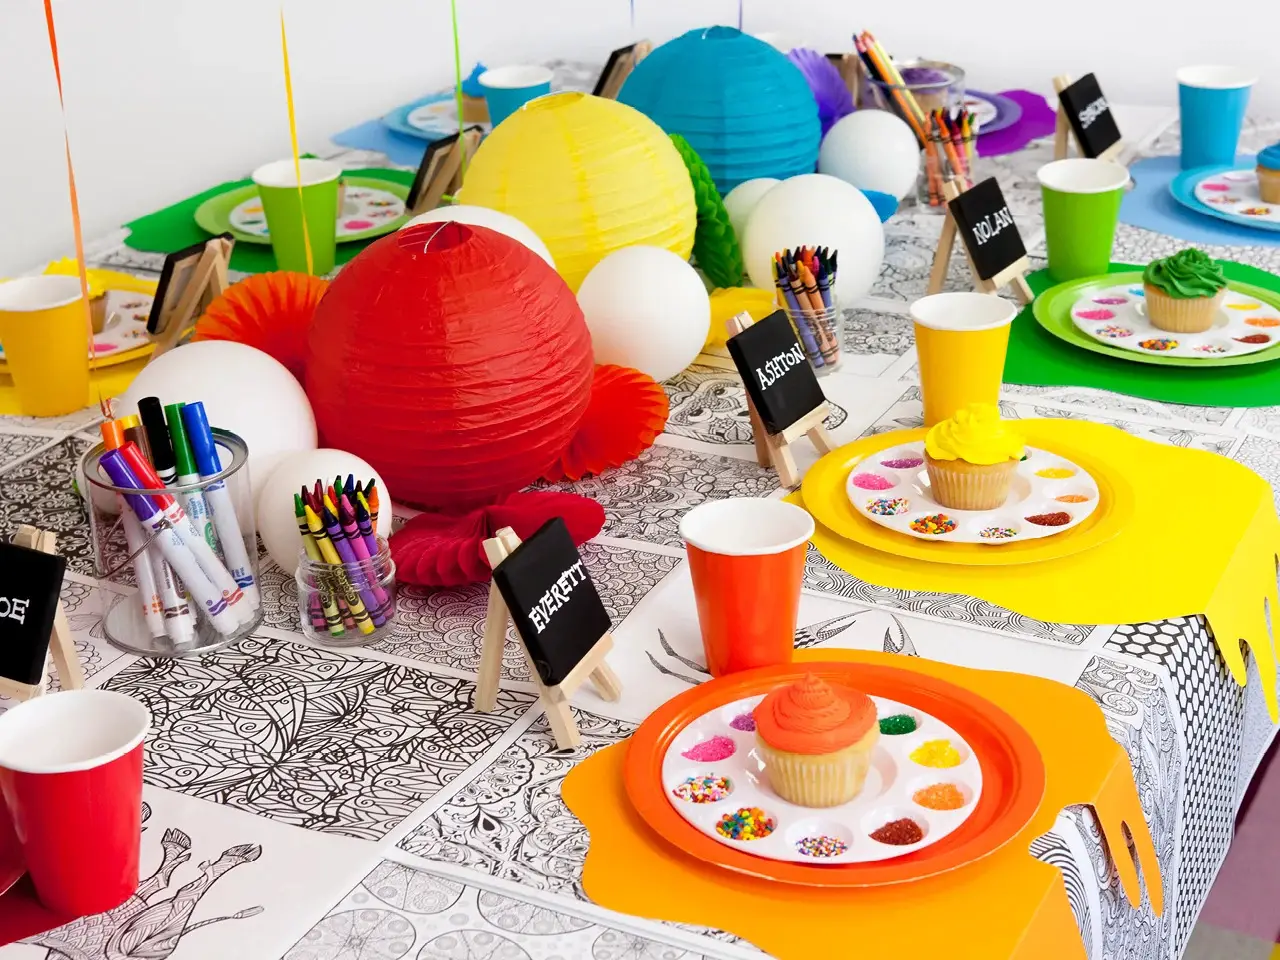 DIY Art Themed Birthday Party: Tips and Ideas for a Creative